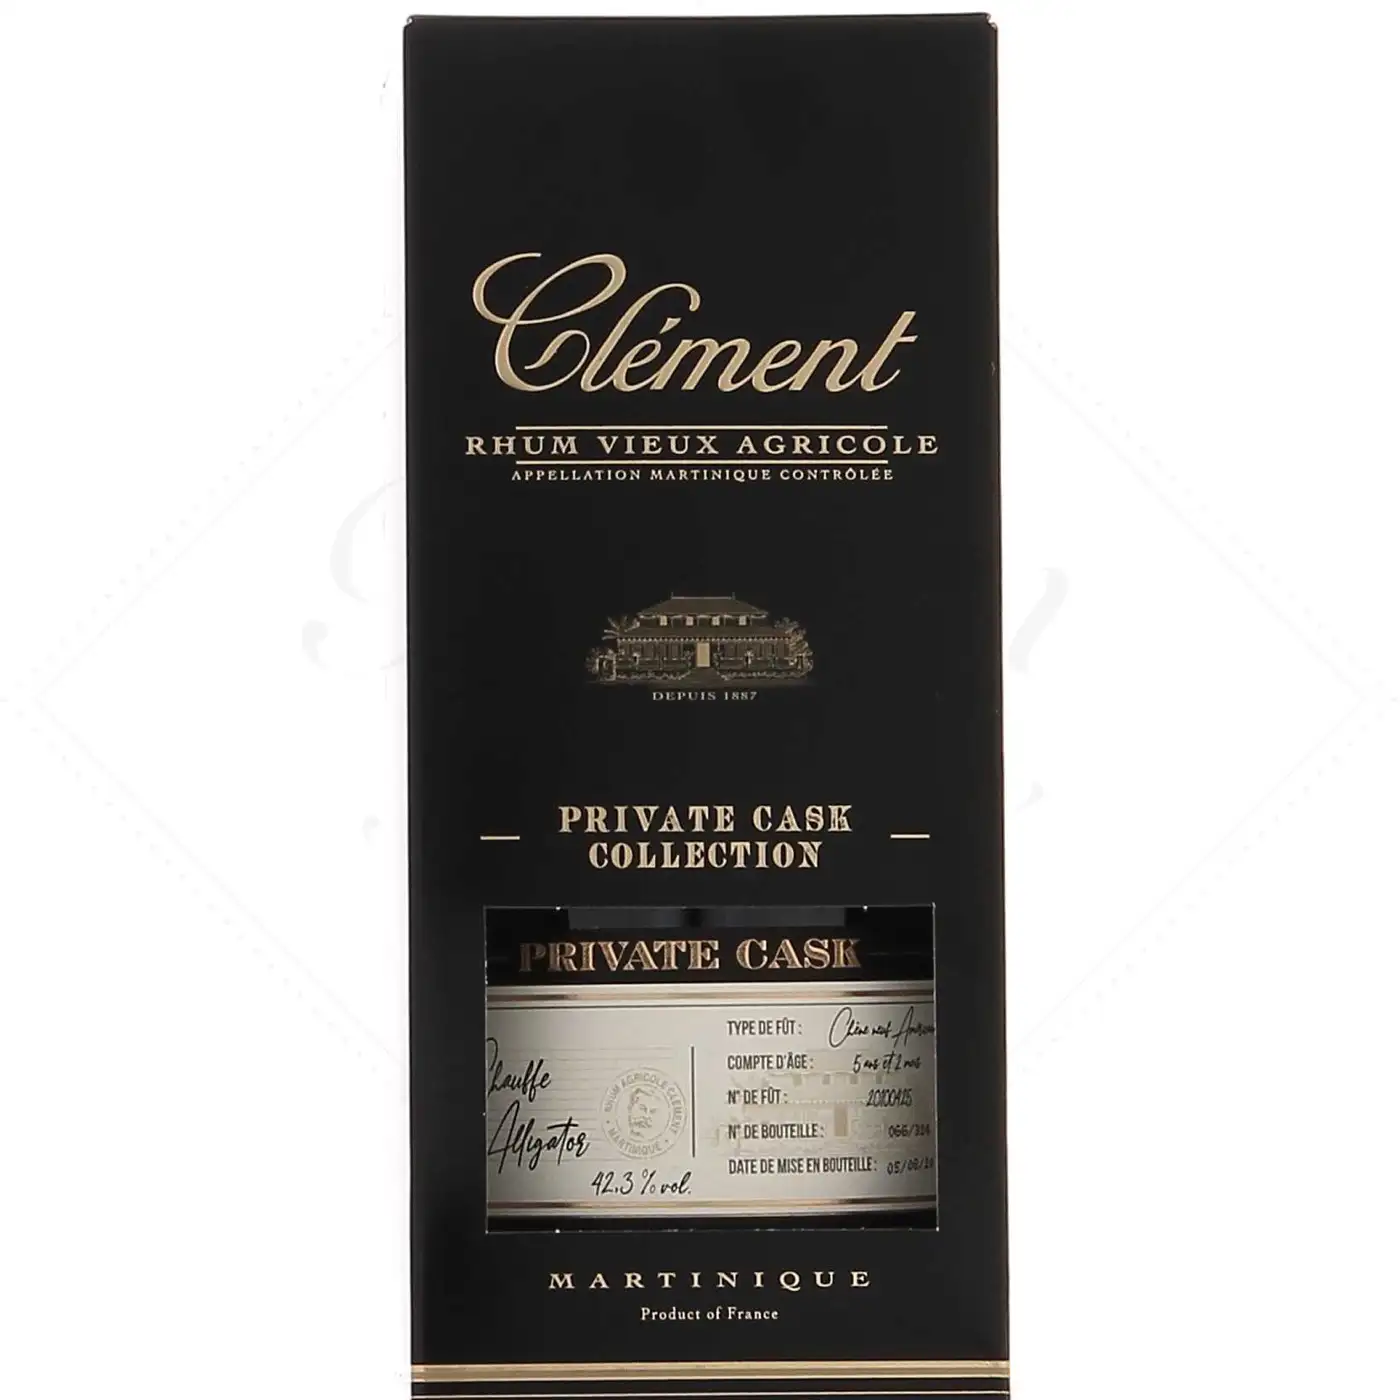 Image of the front of the bottle of the rum Clément Private Cask Chauffe Alligator